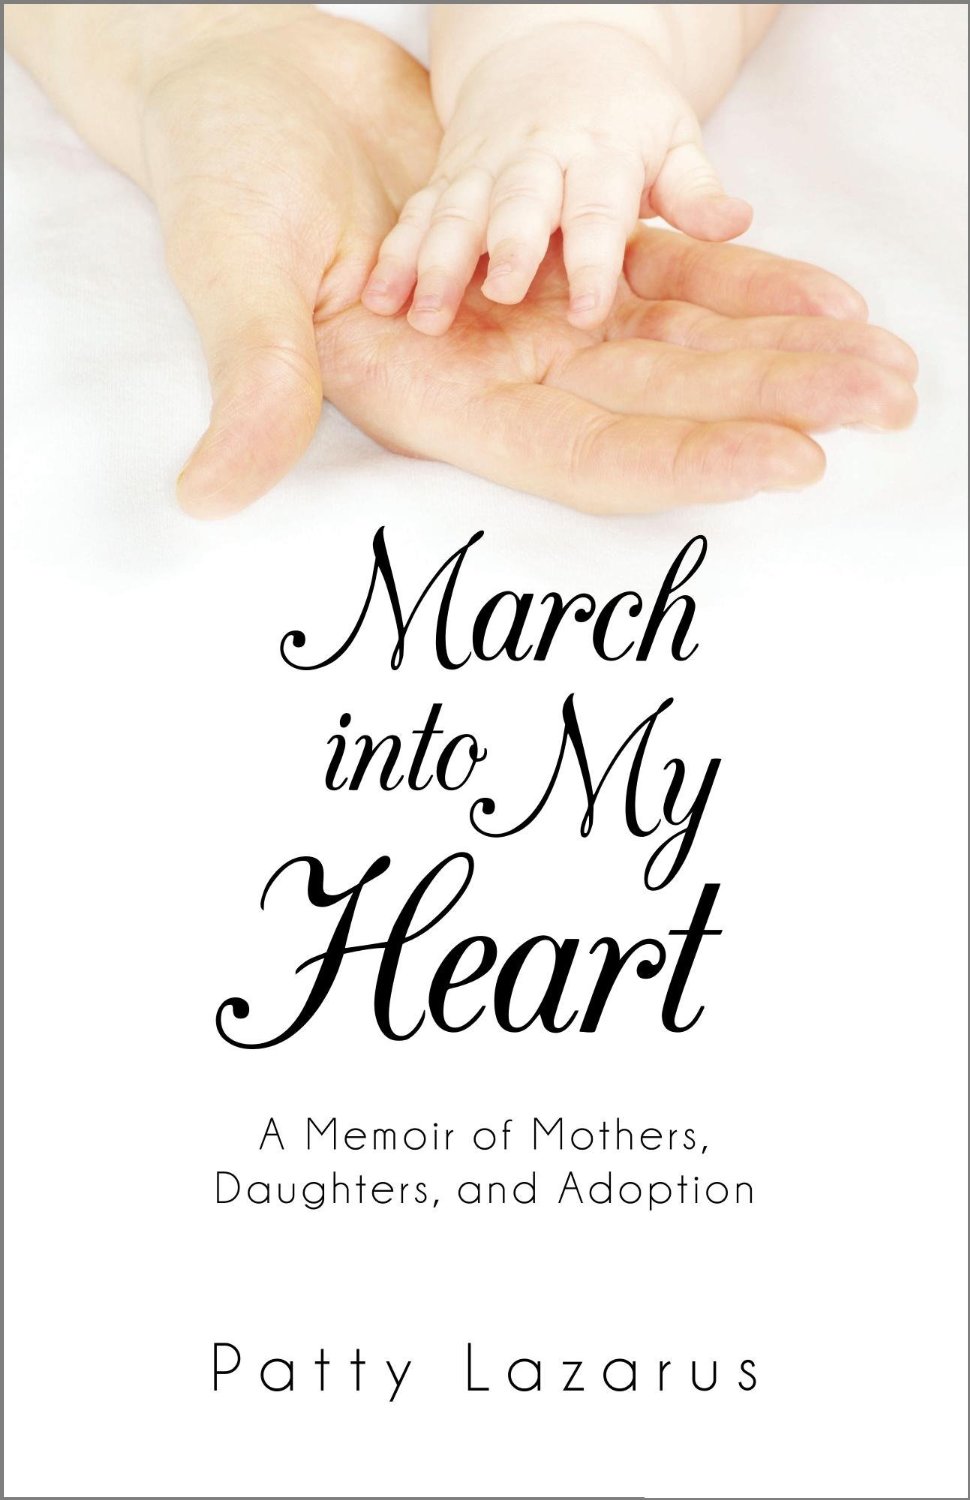 March Into My Heart, a Memoir of Mothers, Daughters, and Adoption by Patty Lazarus